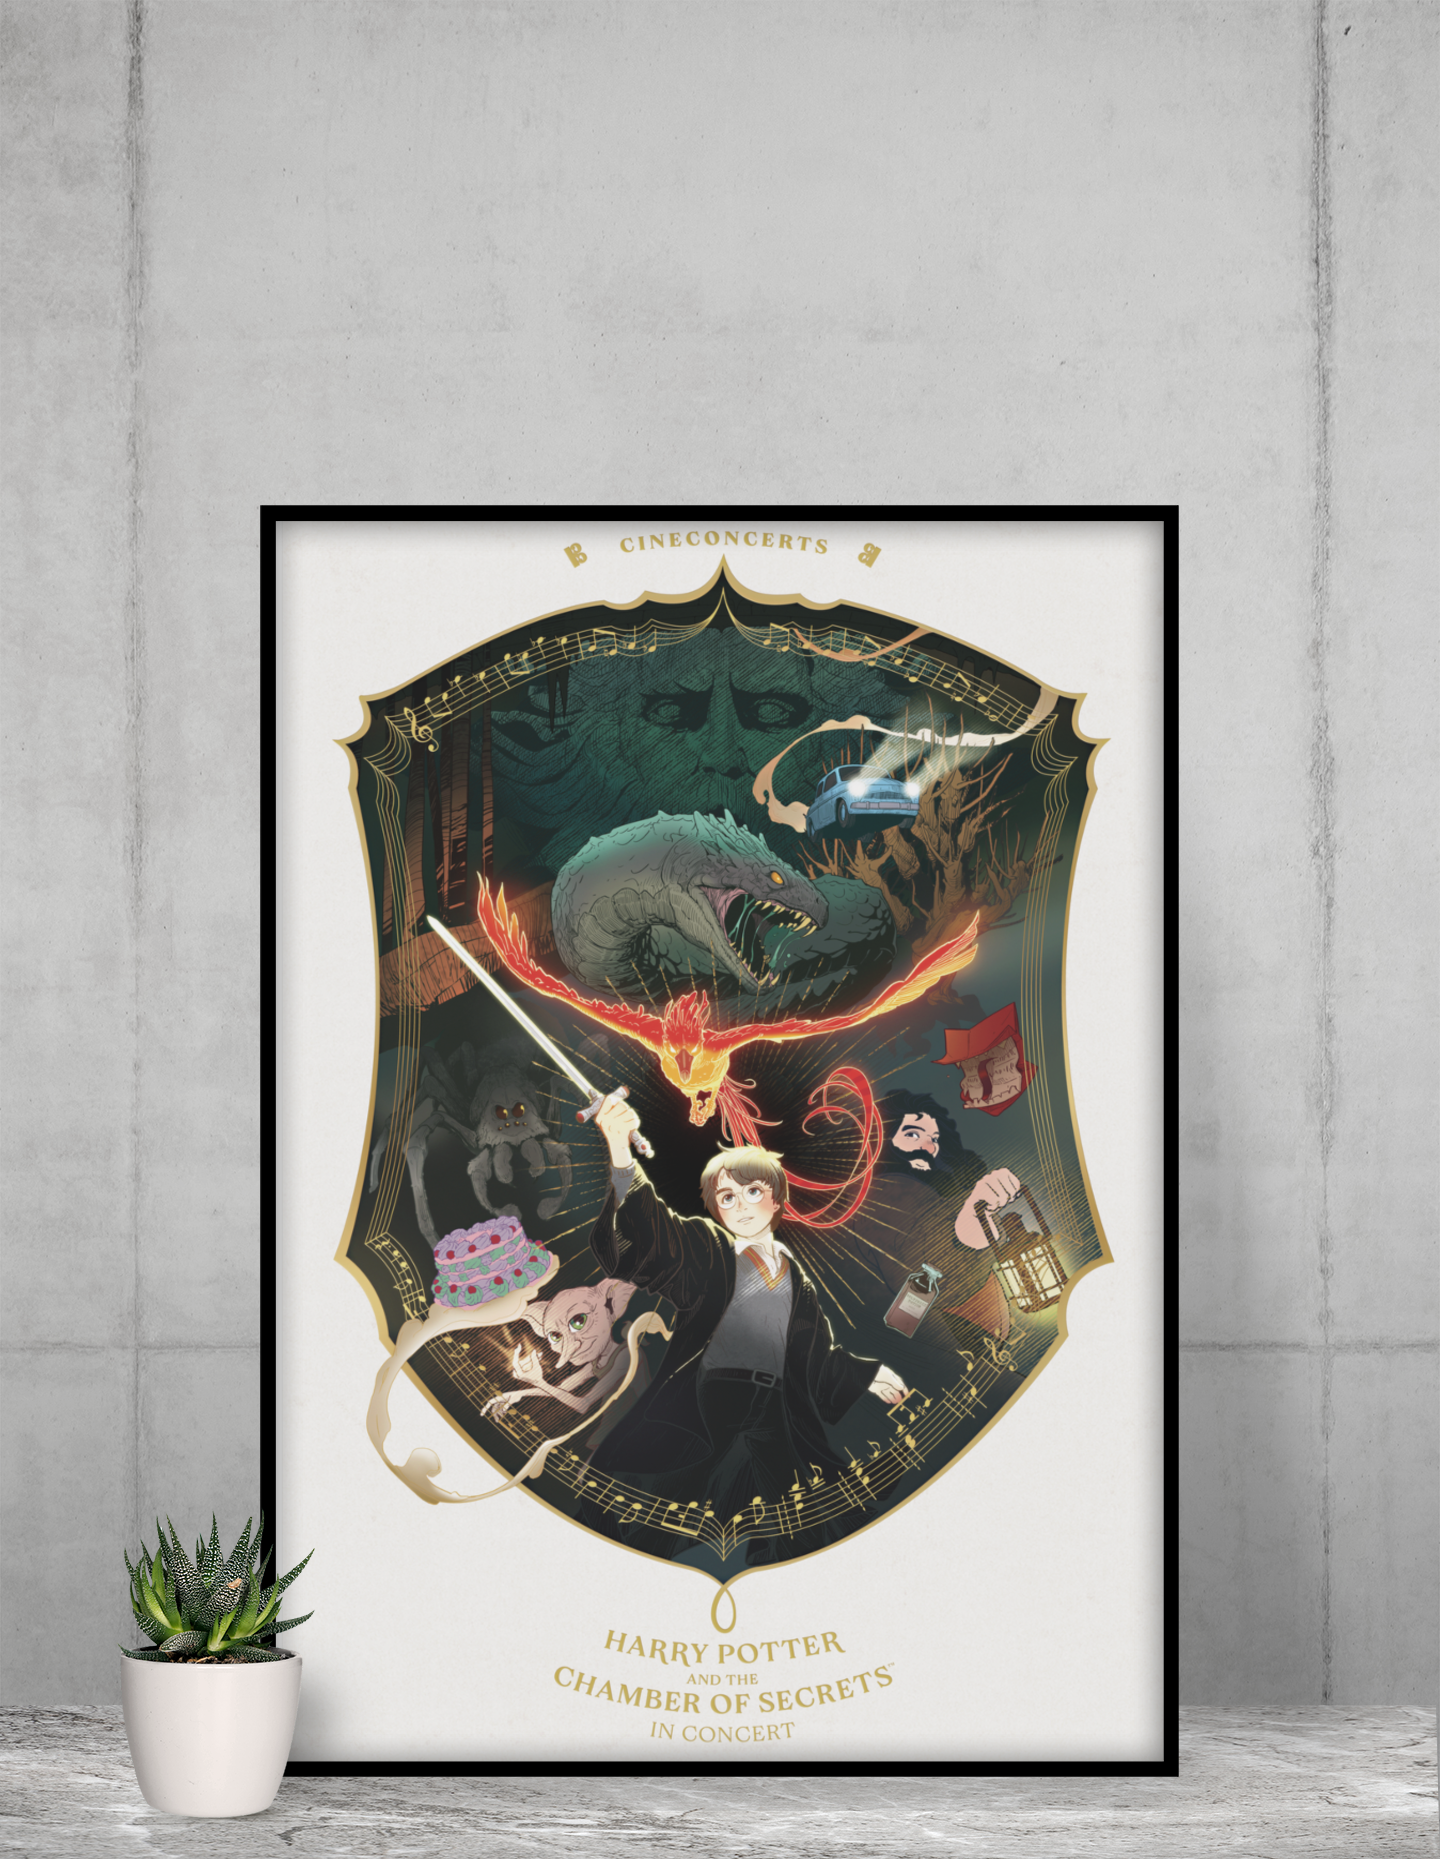 Harry Potter and the Chamber of Secrets™ In Concert Poster (24" x 36")